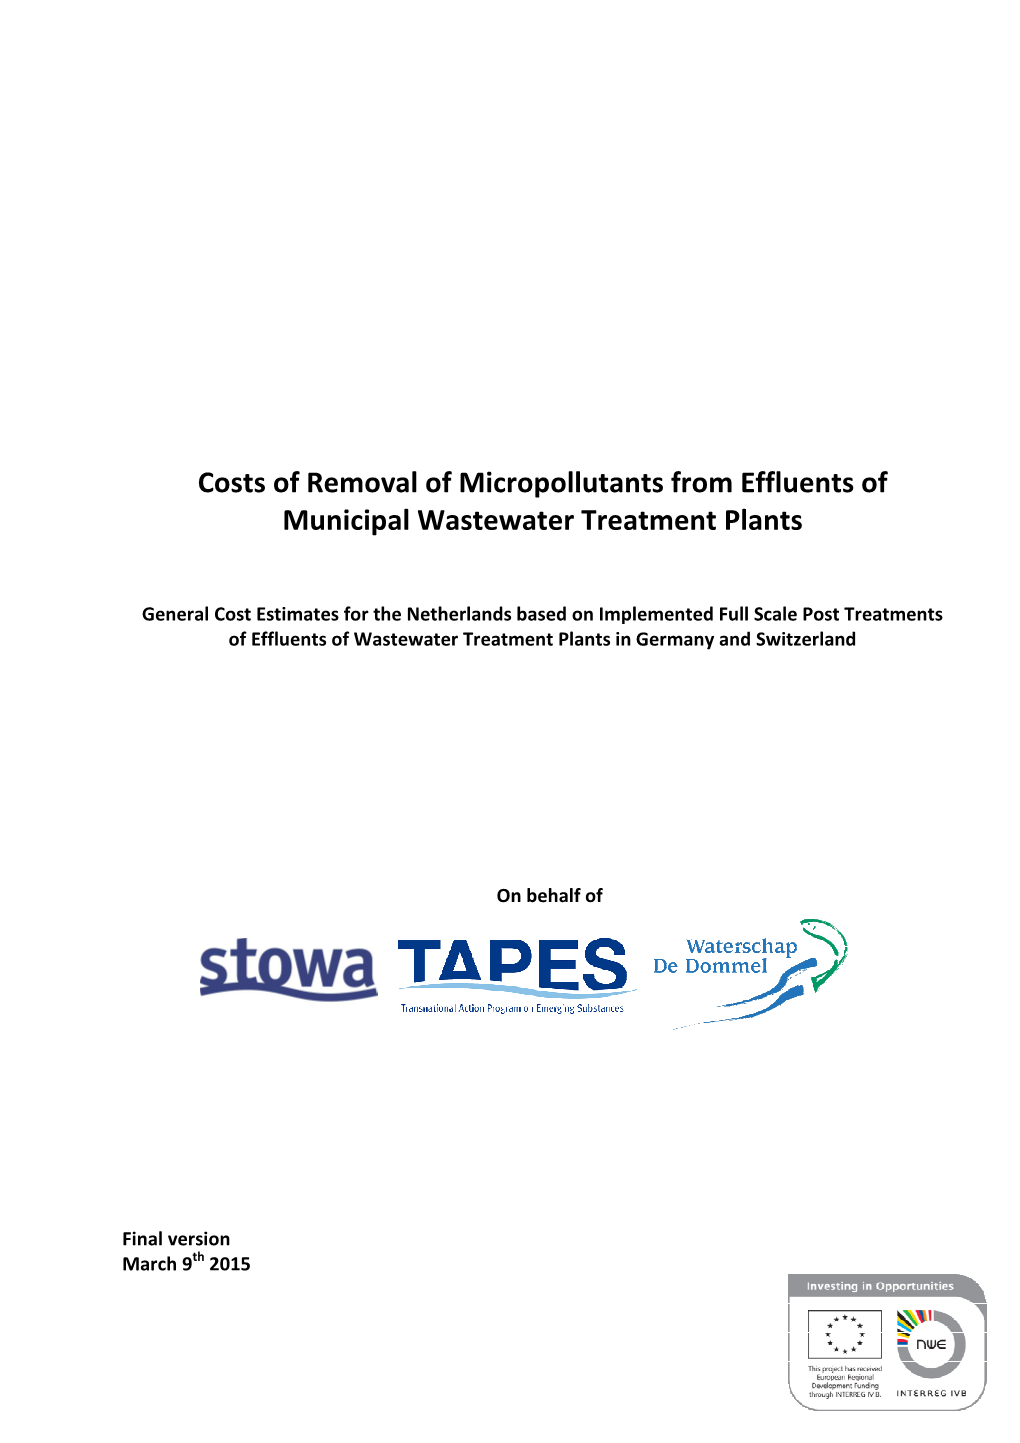 Emoval of Micropollutants from Municipal Wastewater (As of January 2015 [63]; See Also Appendix 1)